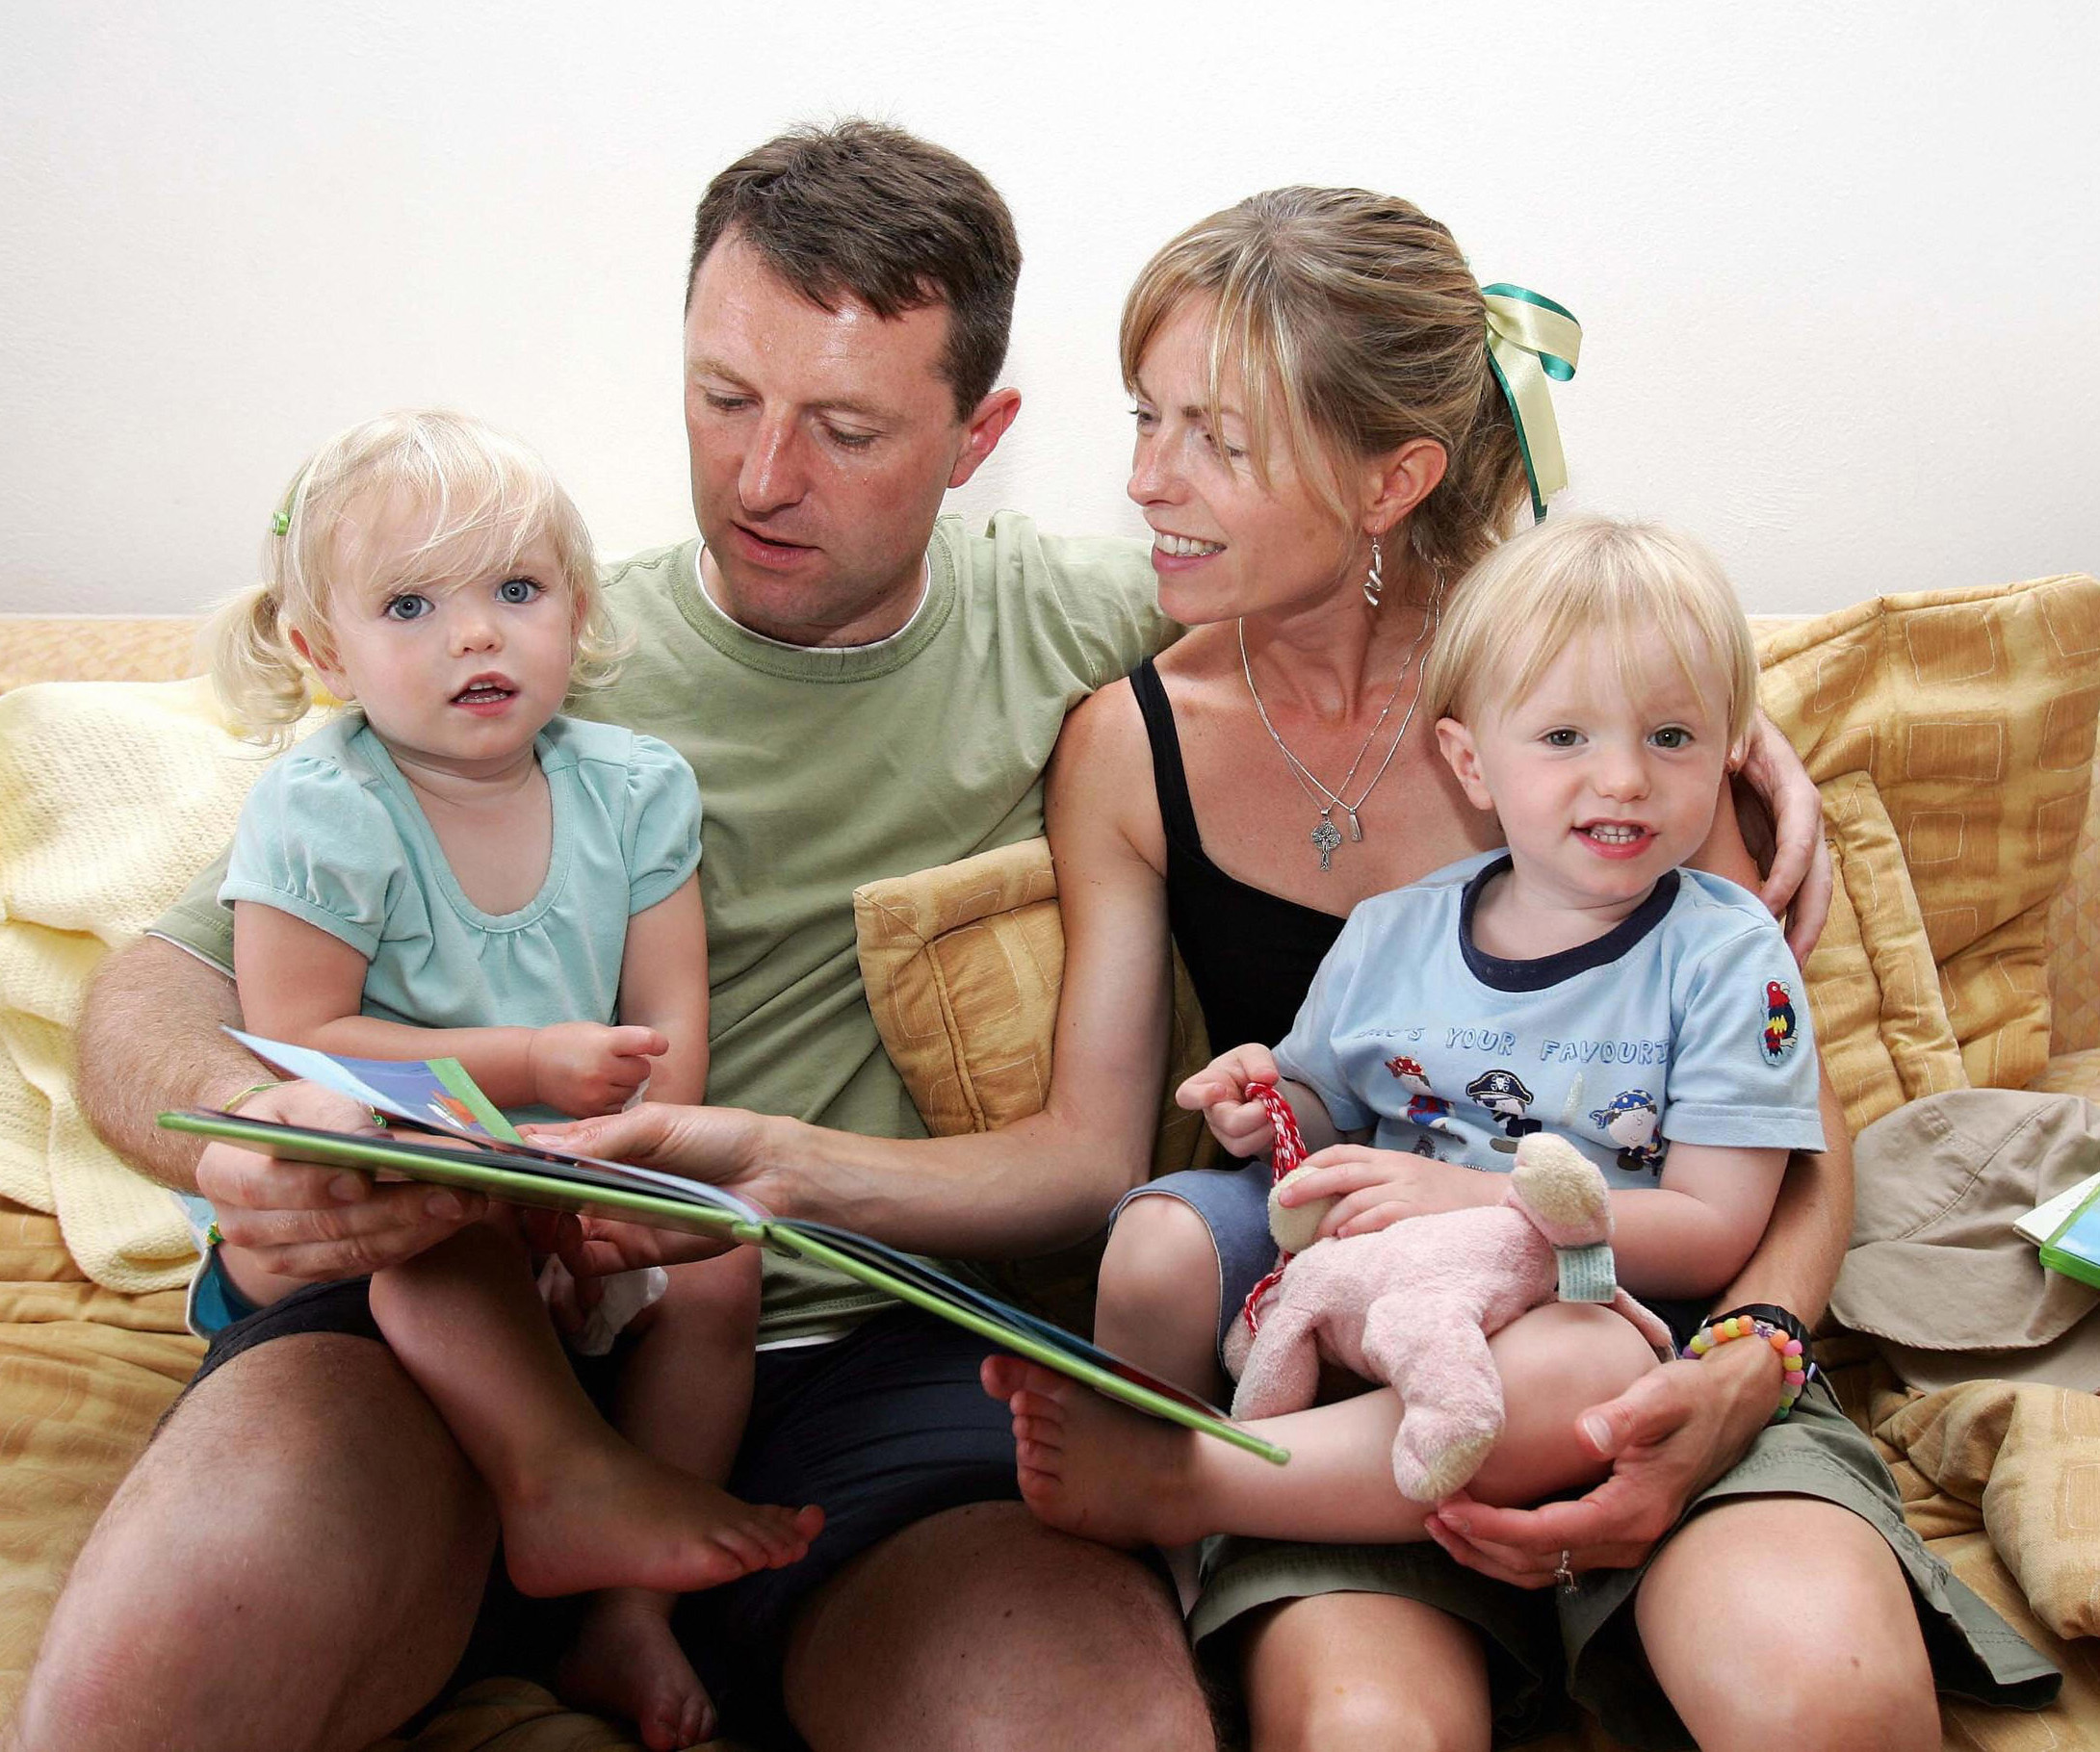 Madeleine McCann's parents Kate and Gerry McCann with their twins Amelie and Sean.